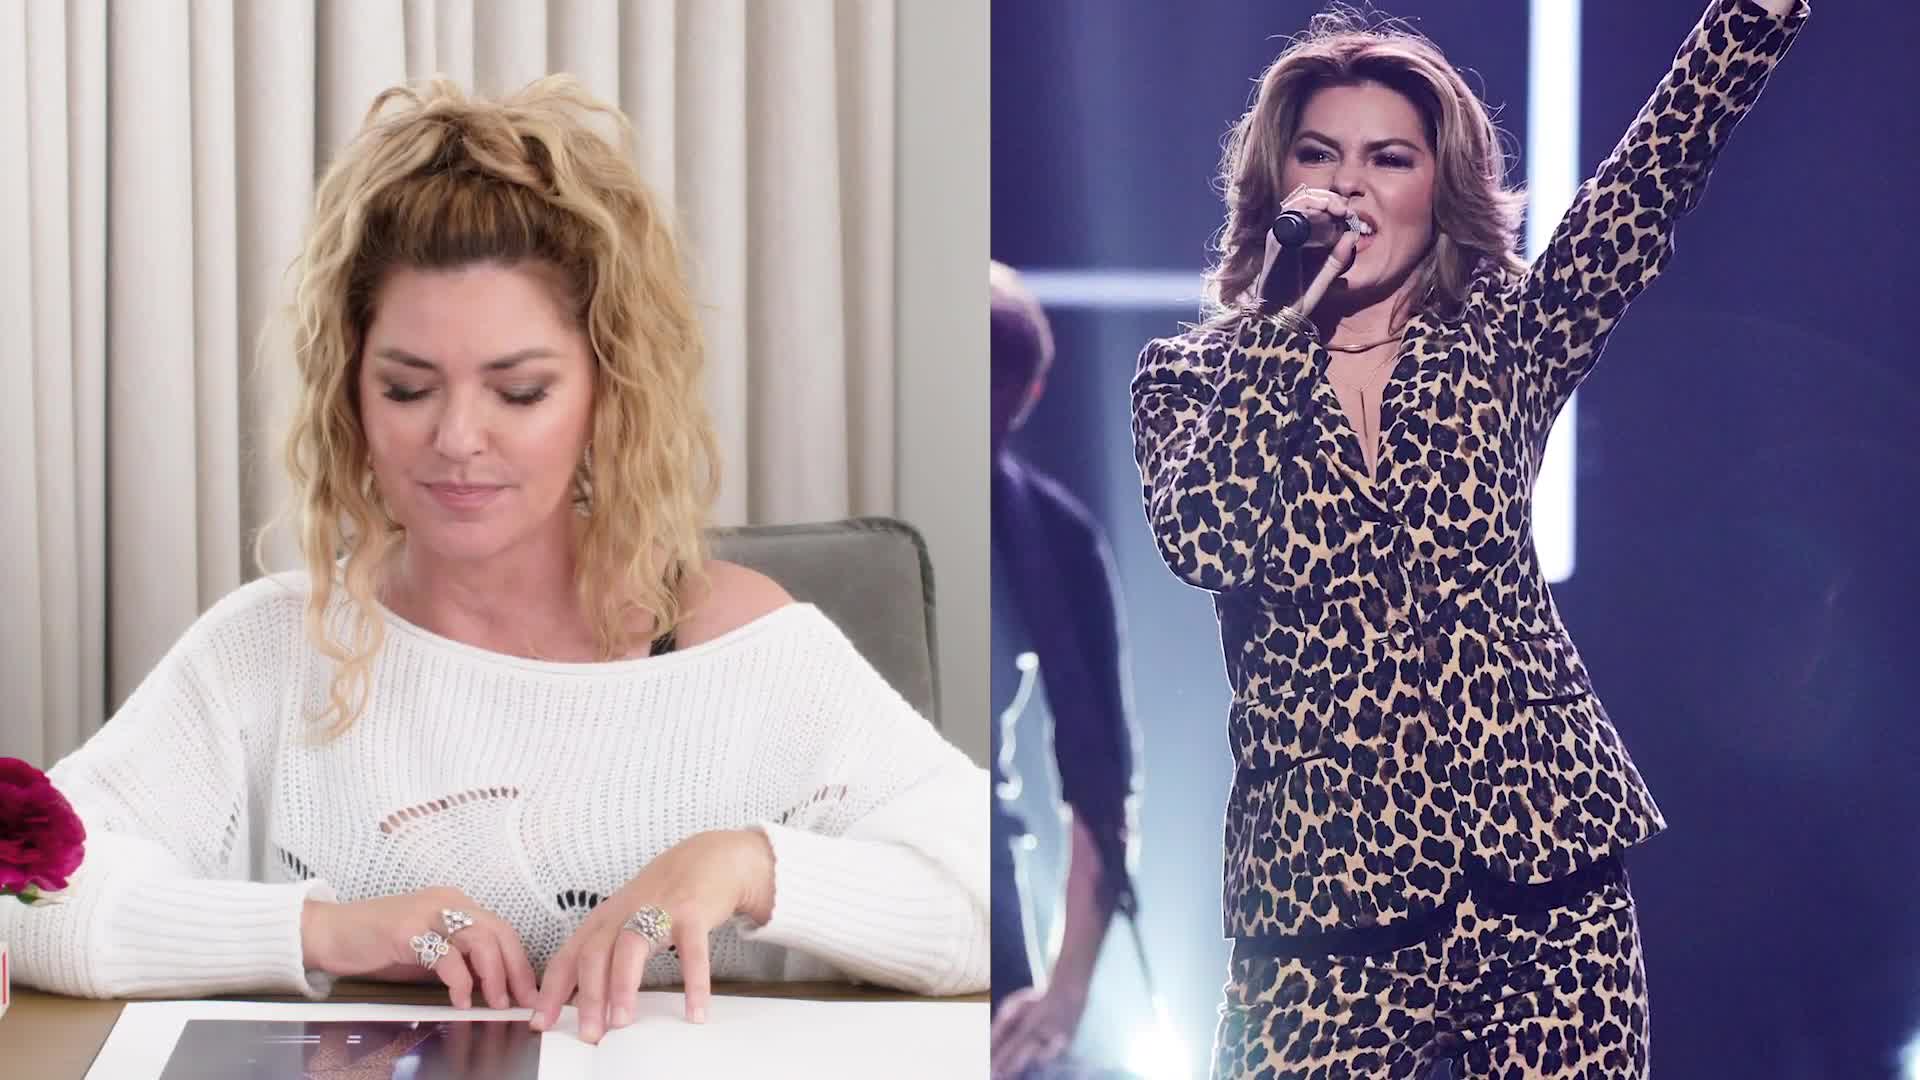 Watch Life In Looks Shania Twain On Her Best Fashion Moments From Leopard Prints To Canadian Tuxedos Vogue Video Cne Vogue Com Vogue